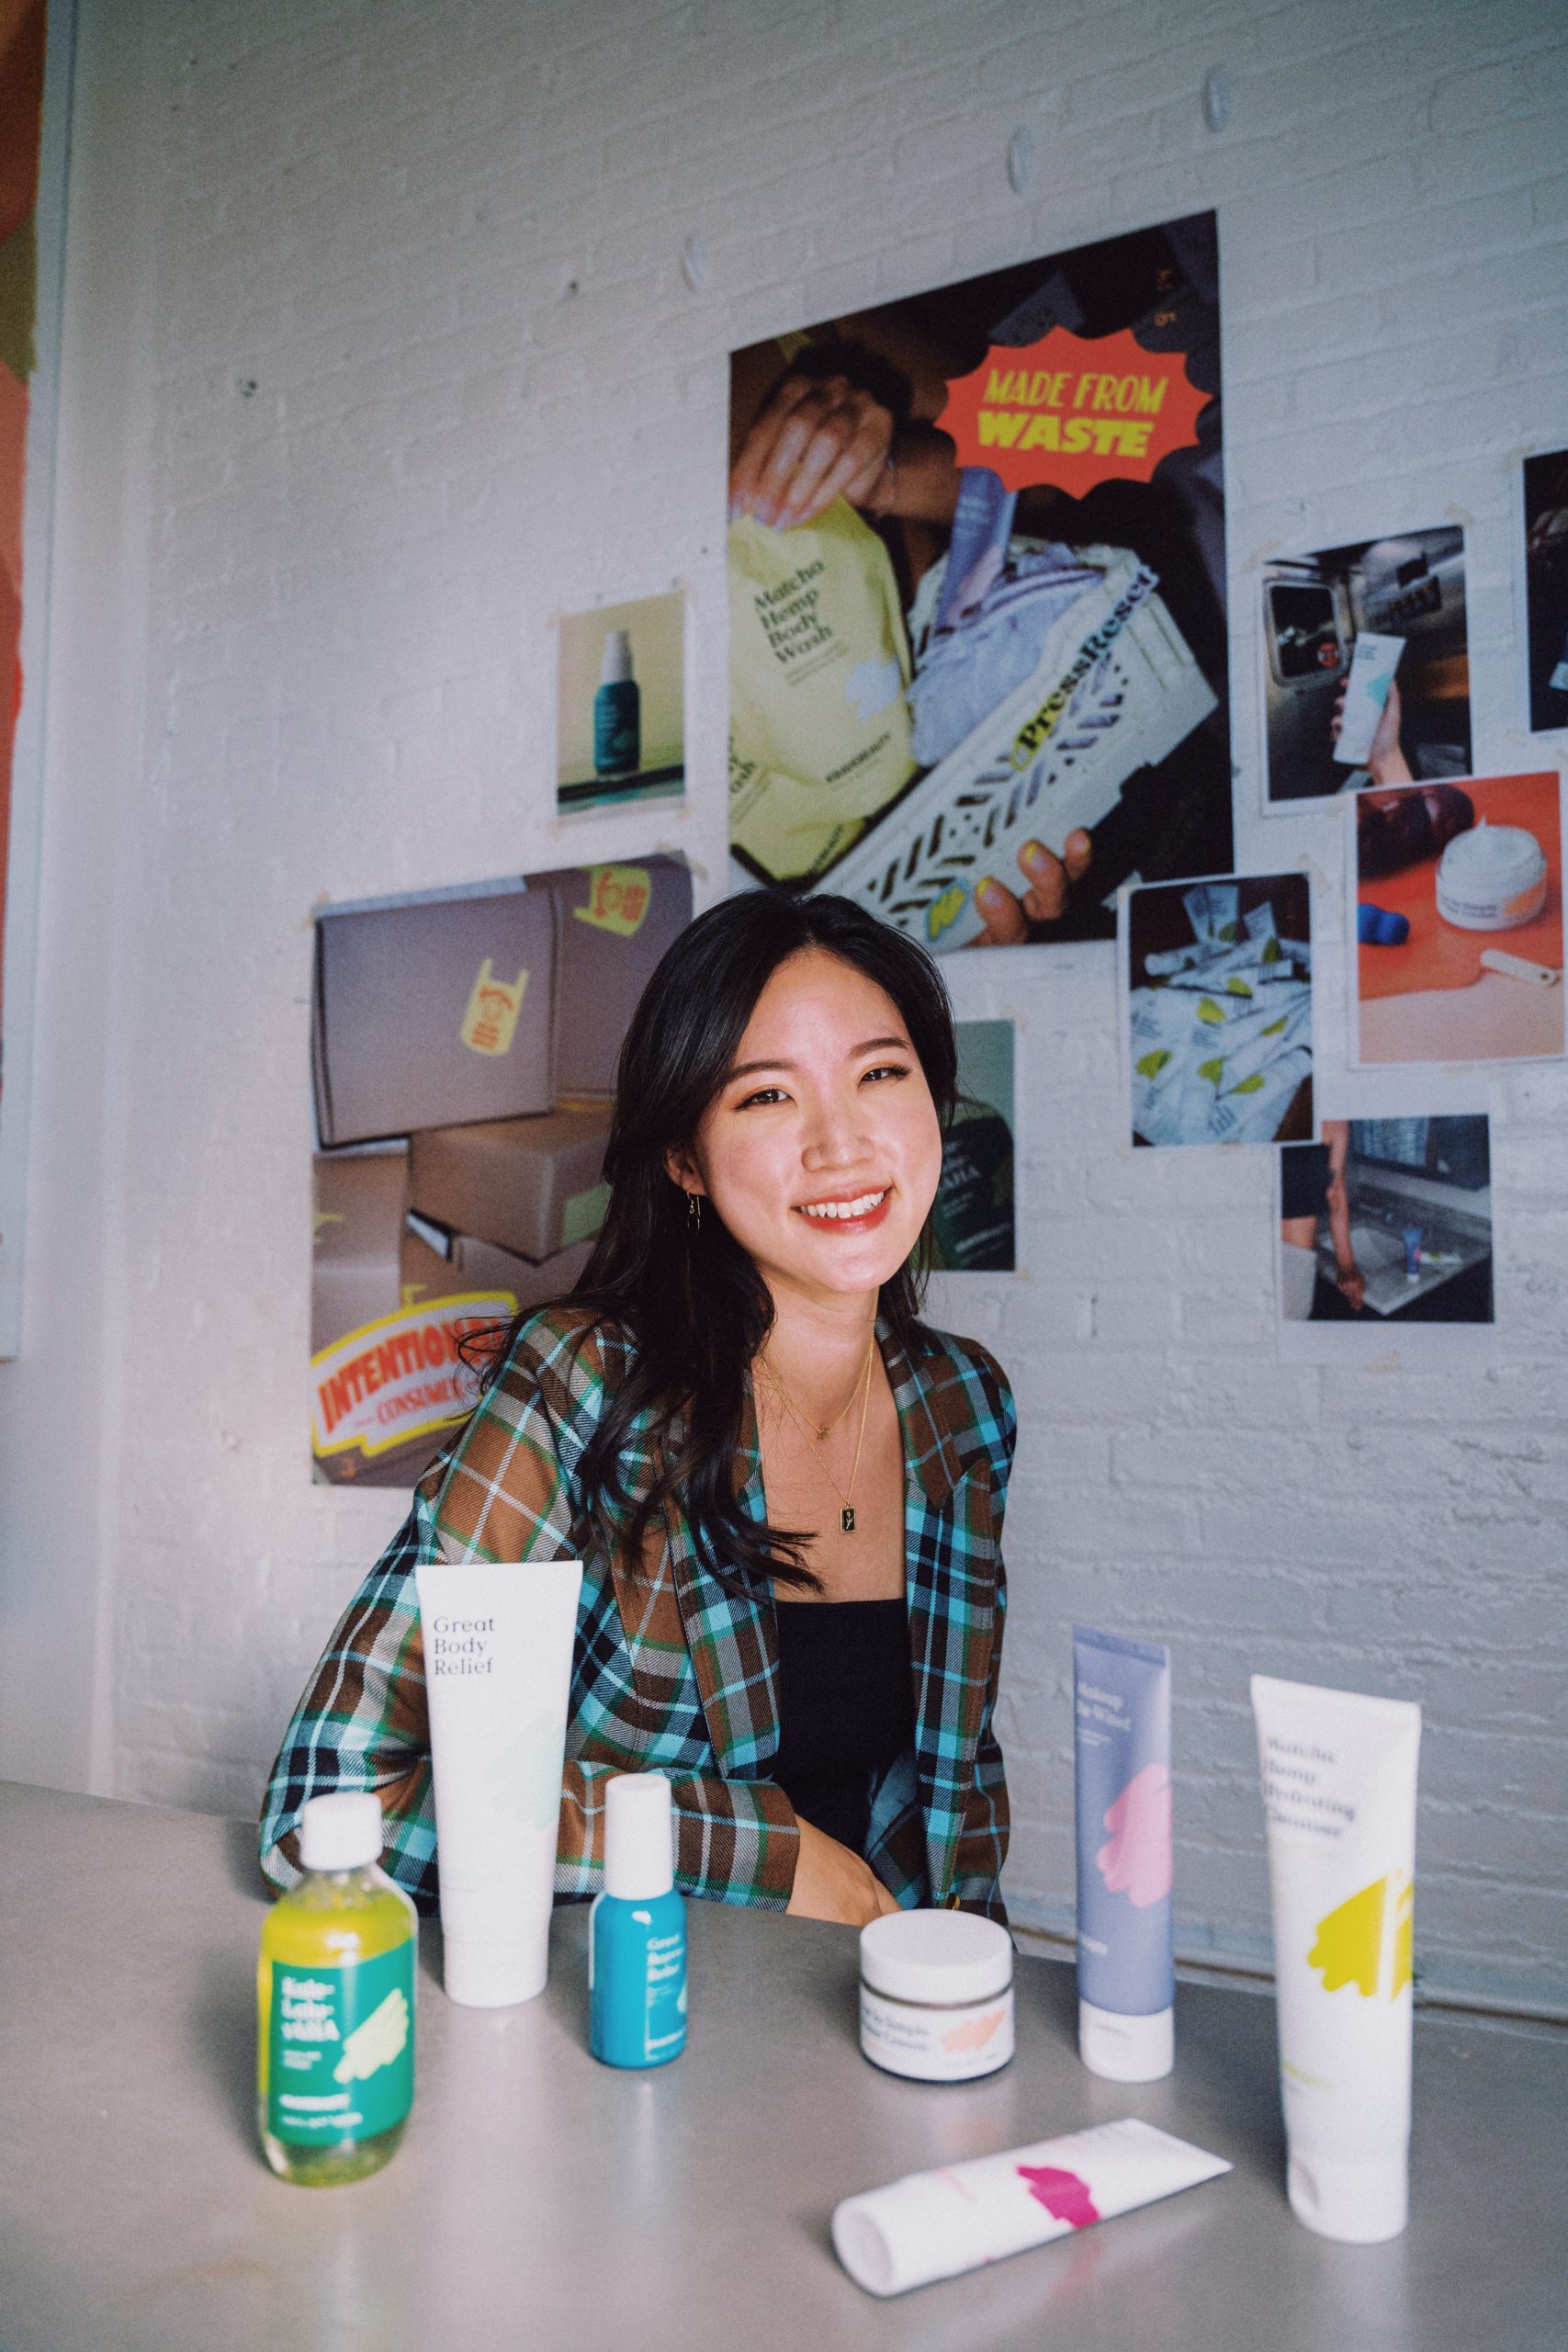 KraveBeauty Founder Liah Yoo on the Brand, Sephora Launch, Content Creation, and More